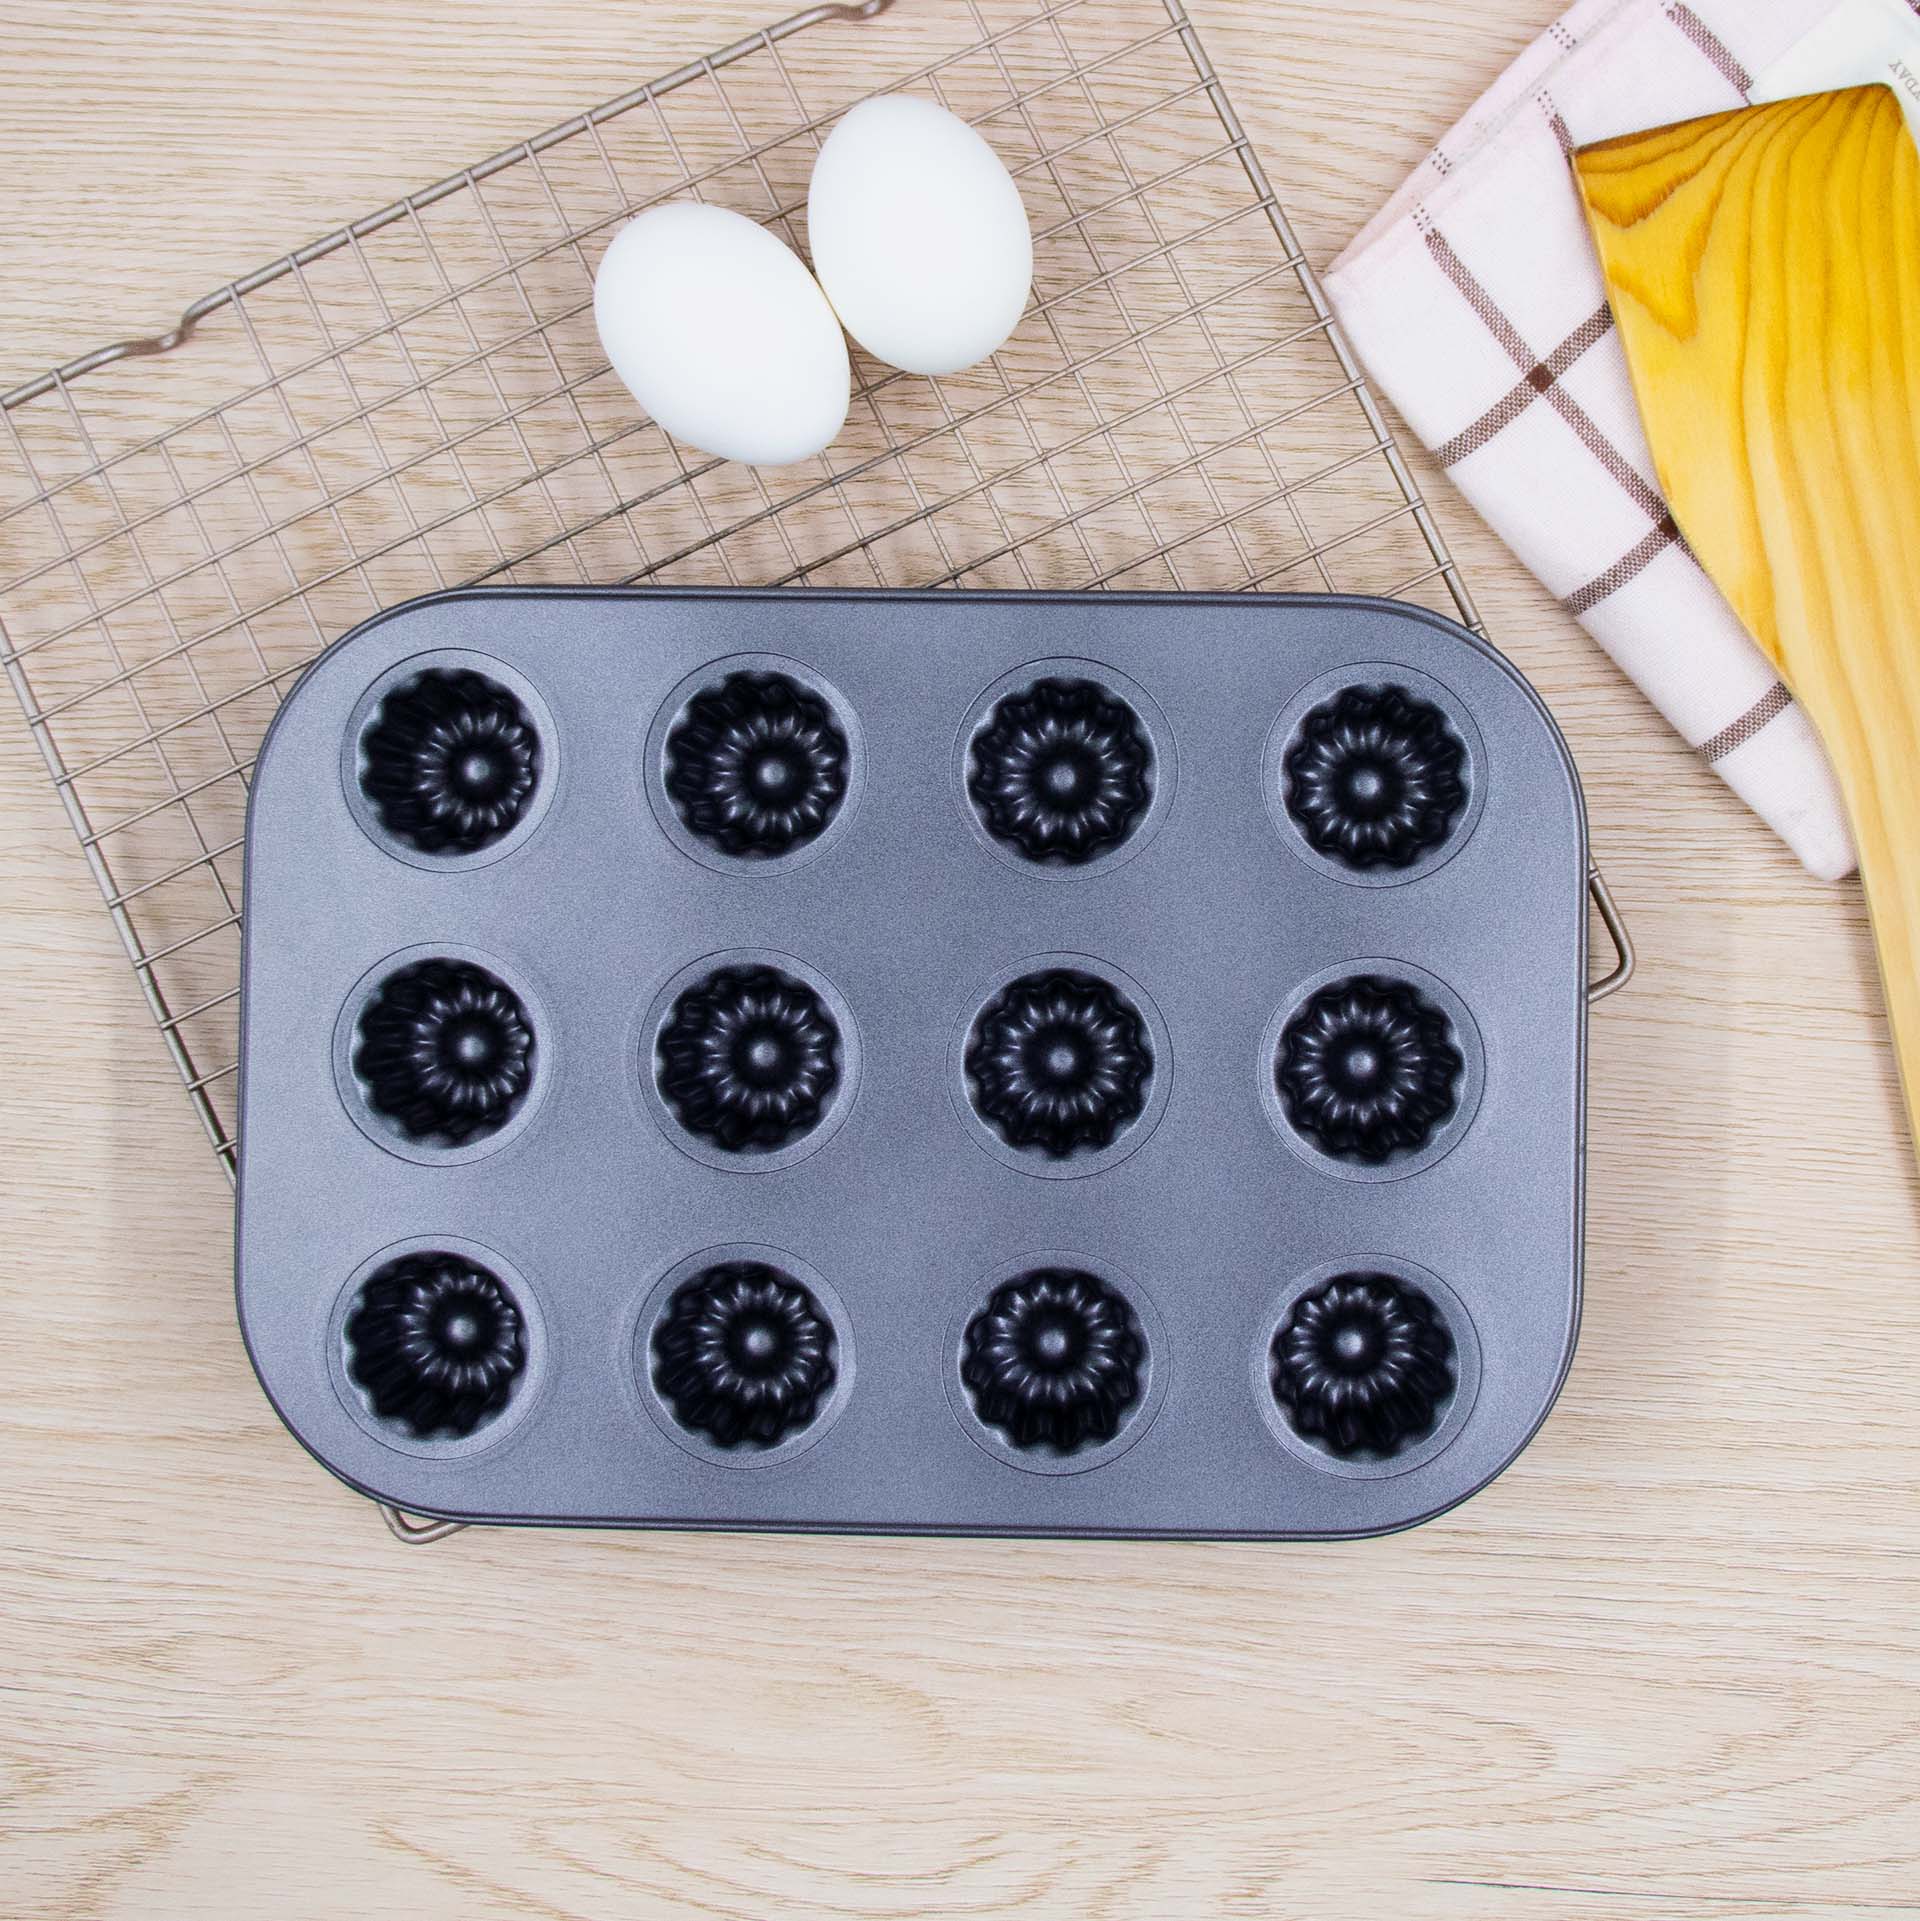 ALKO 12-cup non-stick Canelé Fluted Molds Baking Tray